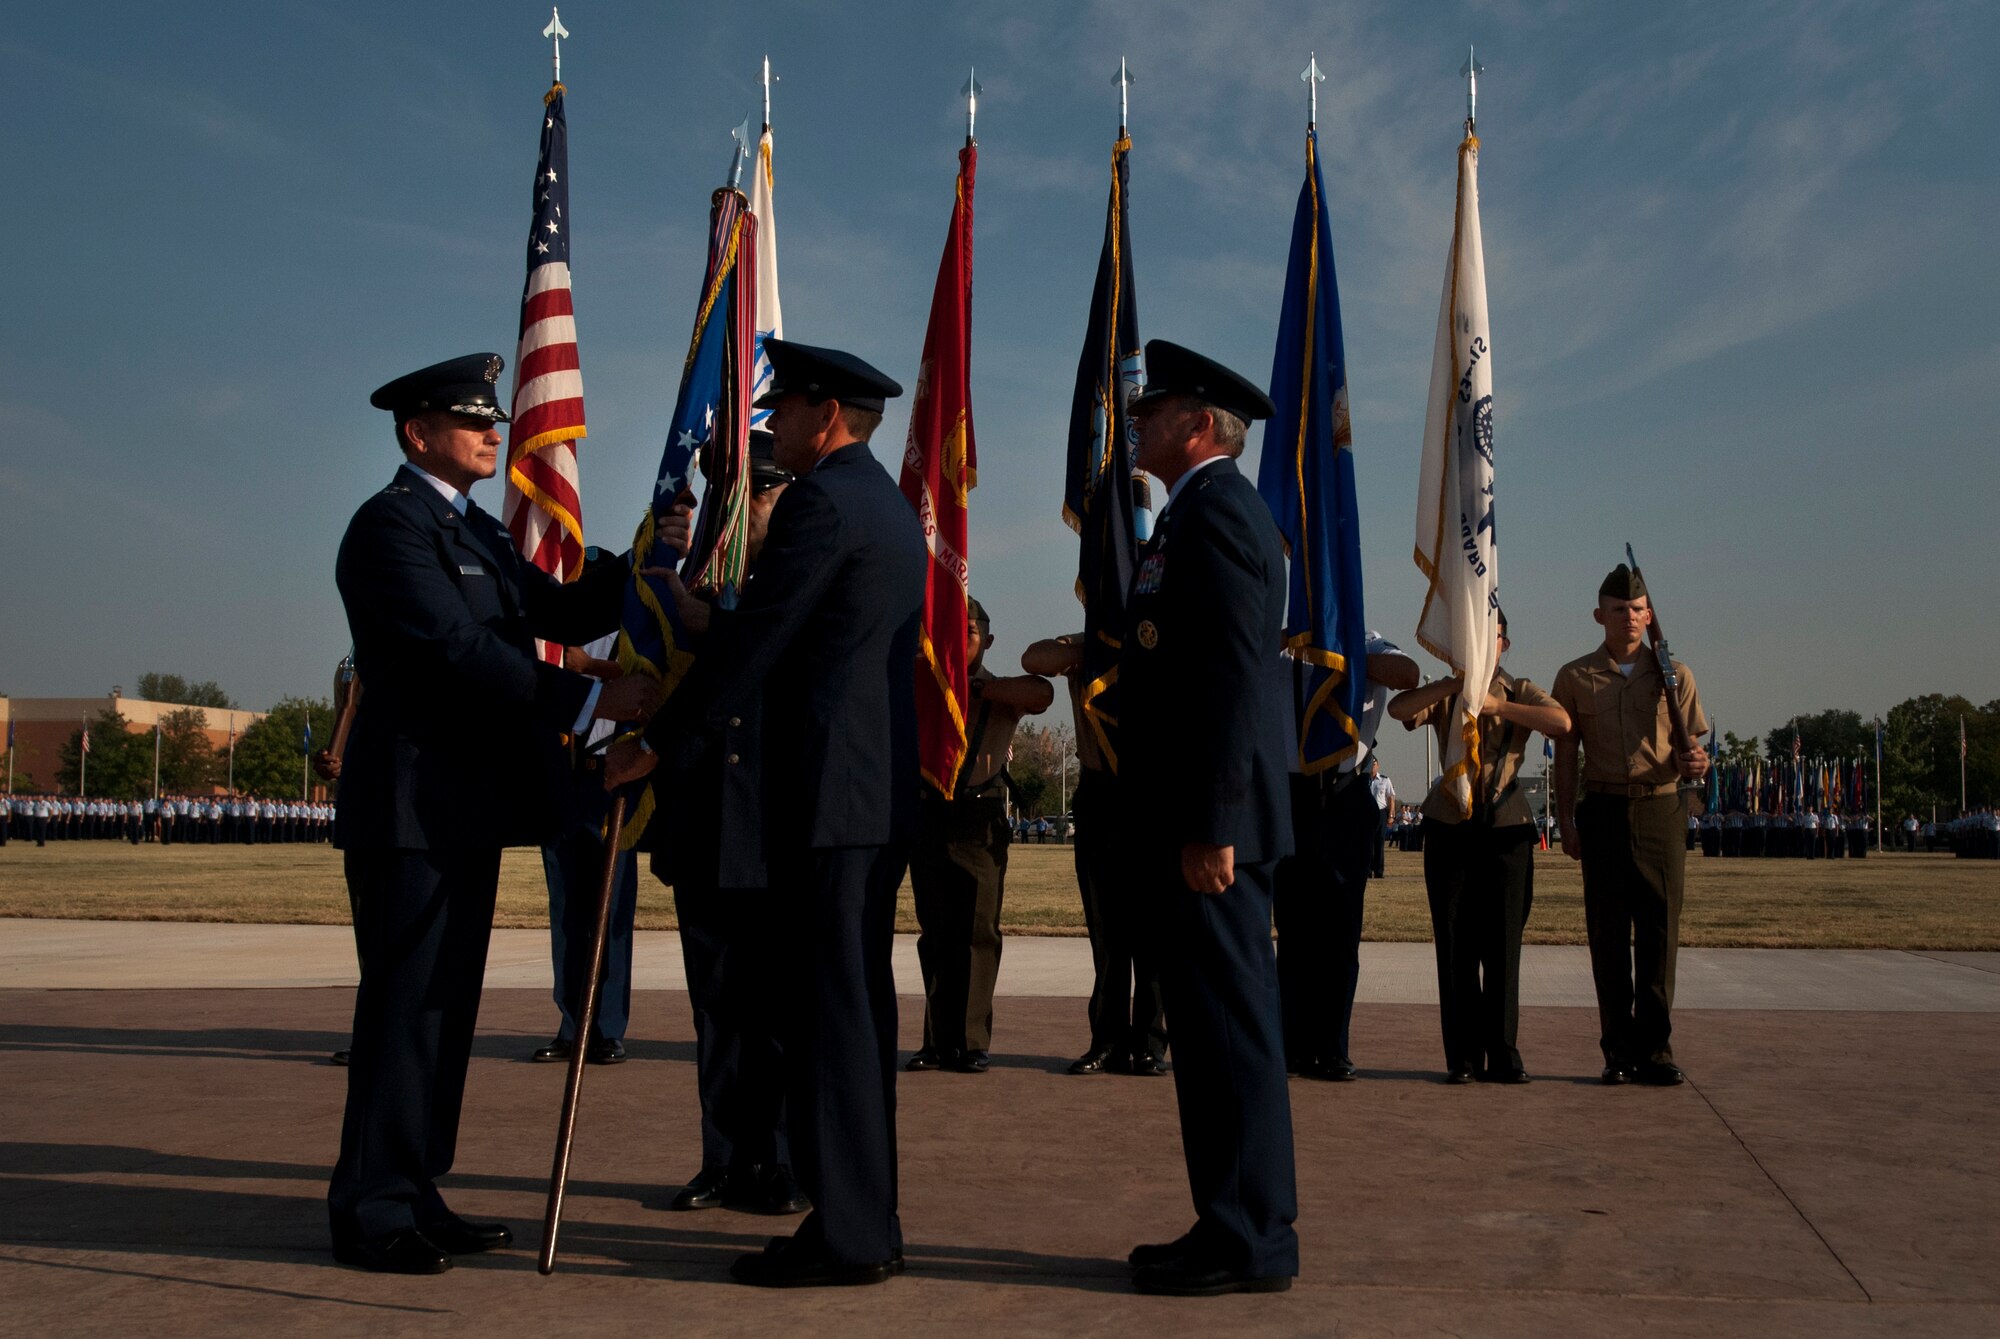 Maj. Gen. Leonard Patrick, 2nd Air Force commander, hands the guidon of the 82nd Training Wing to Brig. Gen. Scott Kindsvater during the change of command ceremony Sept. 12, 2013. Kindsvater took command of the largest technical training base from Brig. Gen. Michael Fantini. Patrick presided over the ceremony. (U.S. Air Force photo/Staff Sgt. Mike Meares)